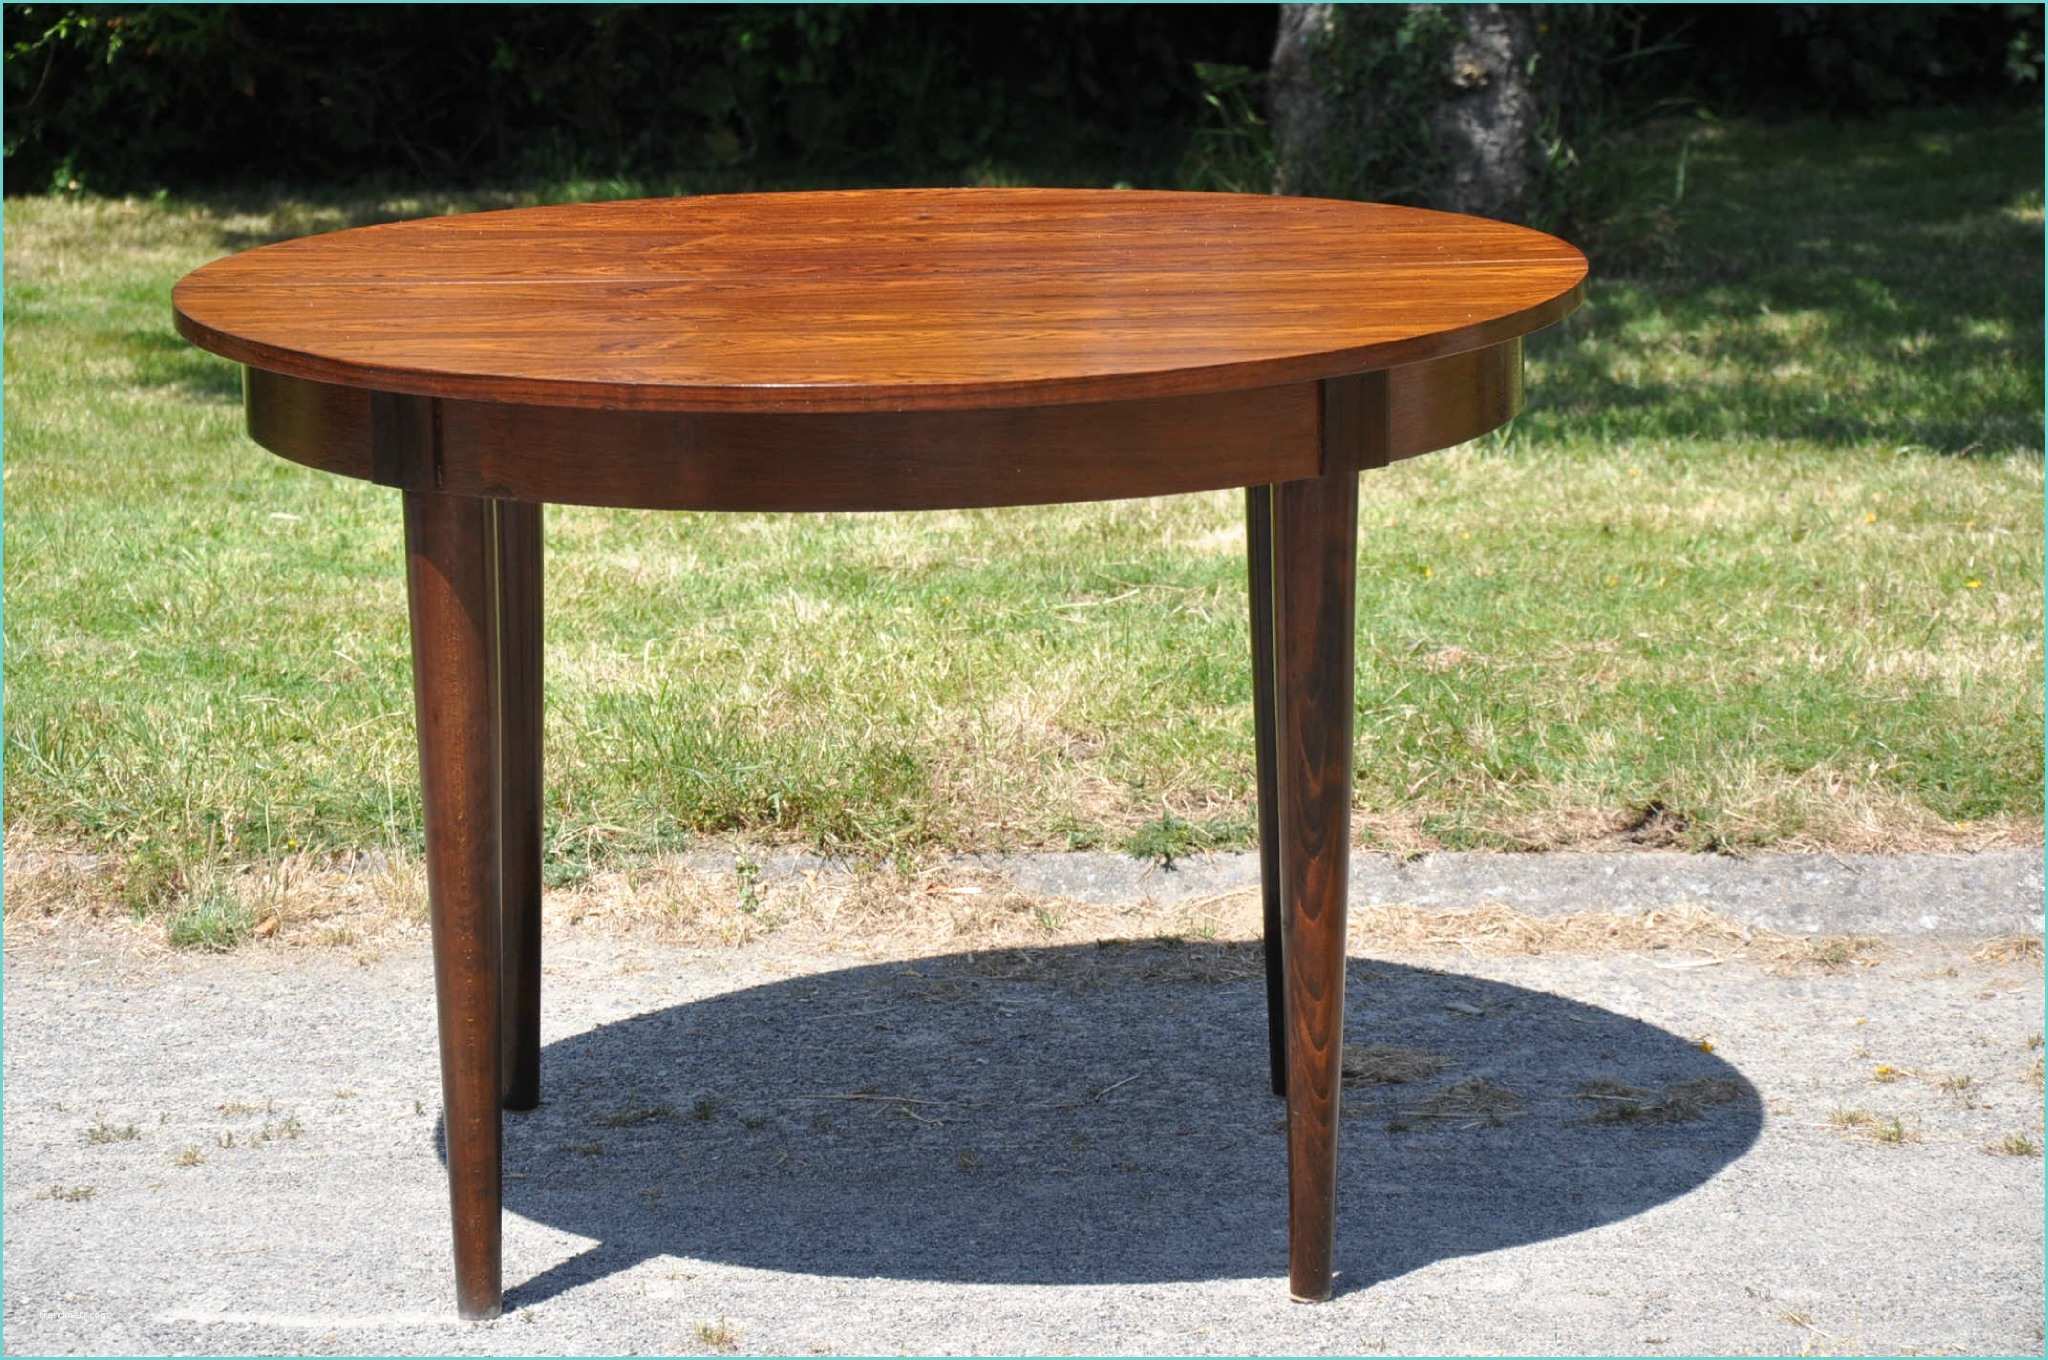 Table Ronde Rallonges Table Ronde Rallonge Stunning Maison with Table Ronde